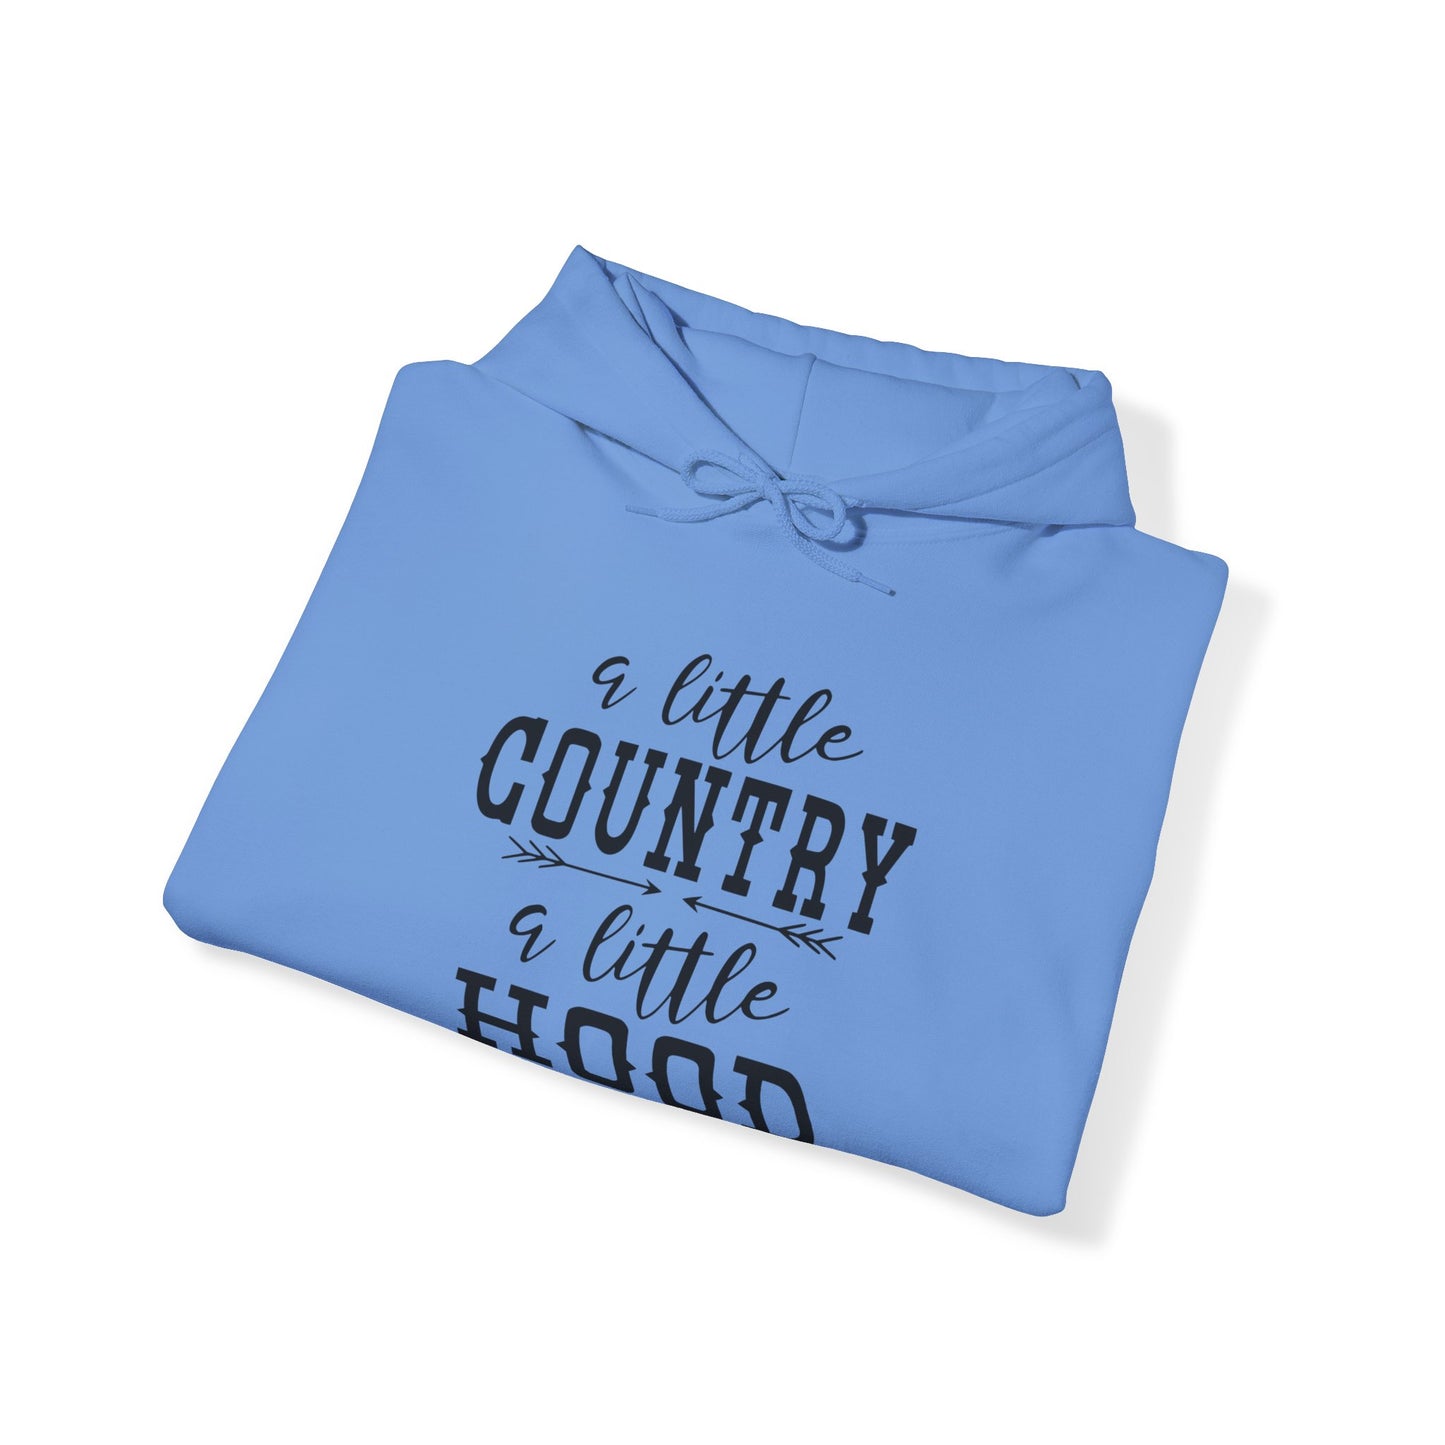 A Liitle Country Hooded Sweatshirt